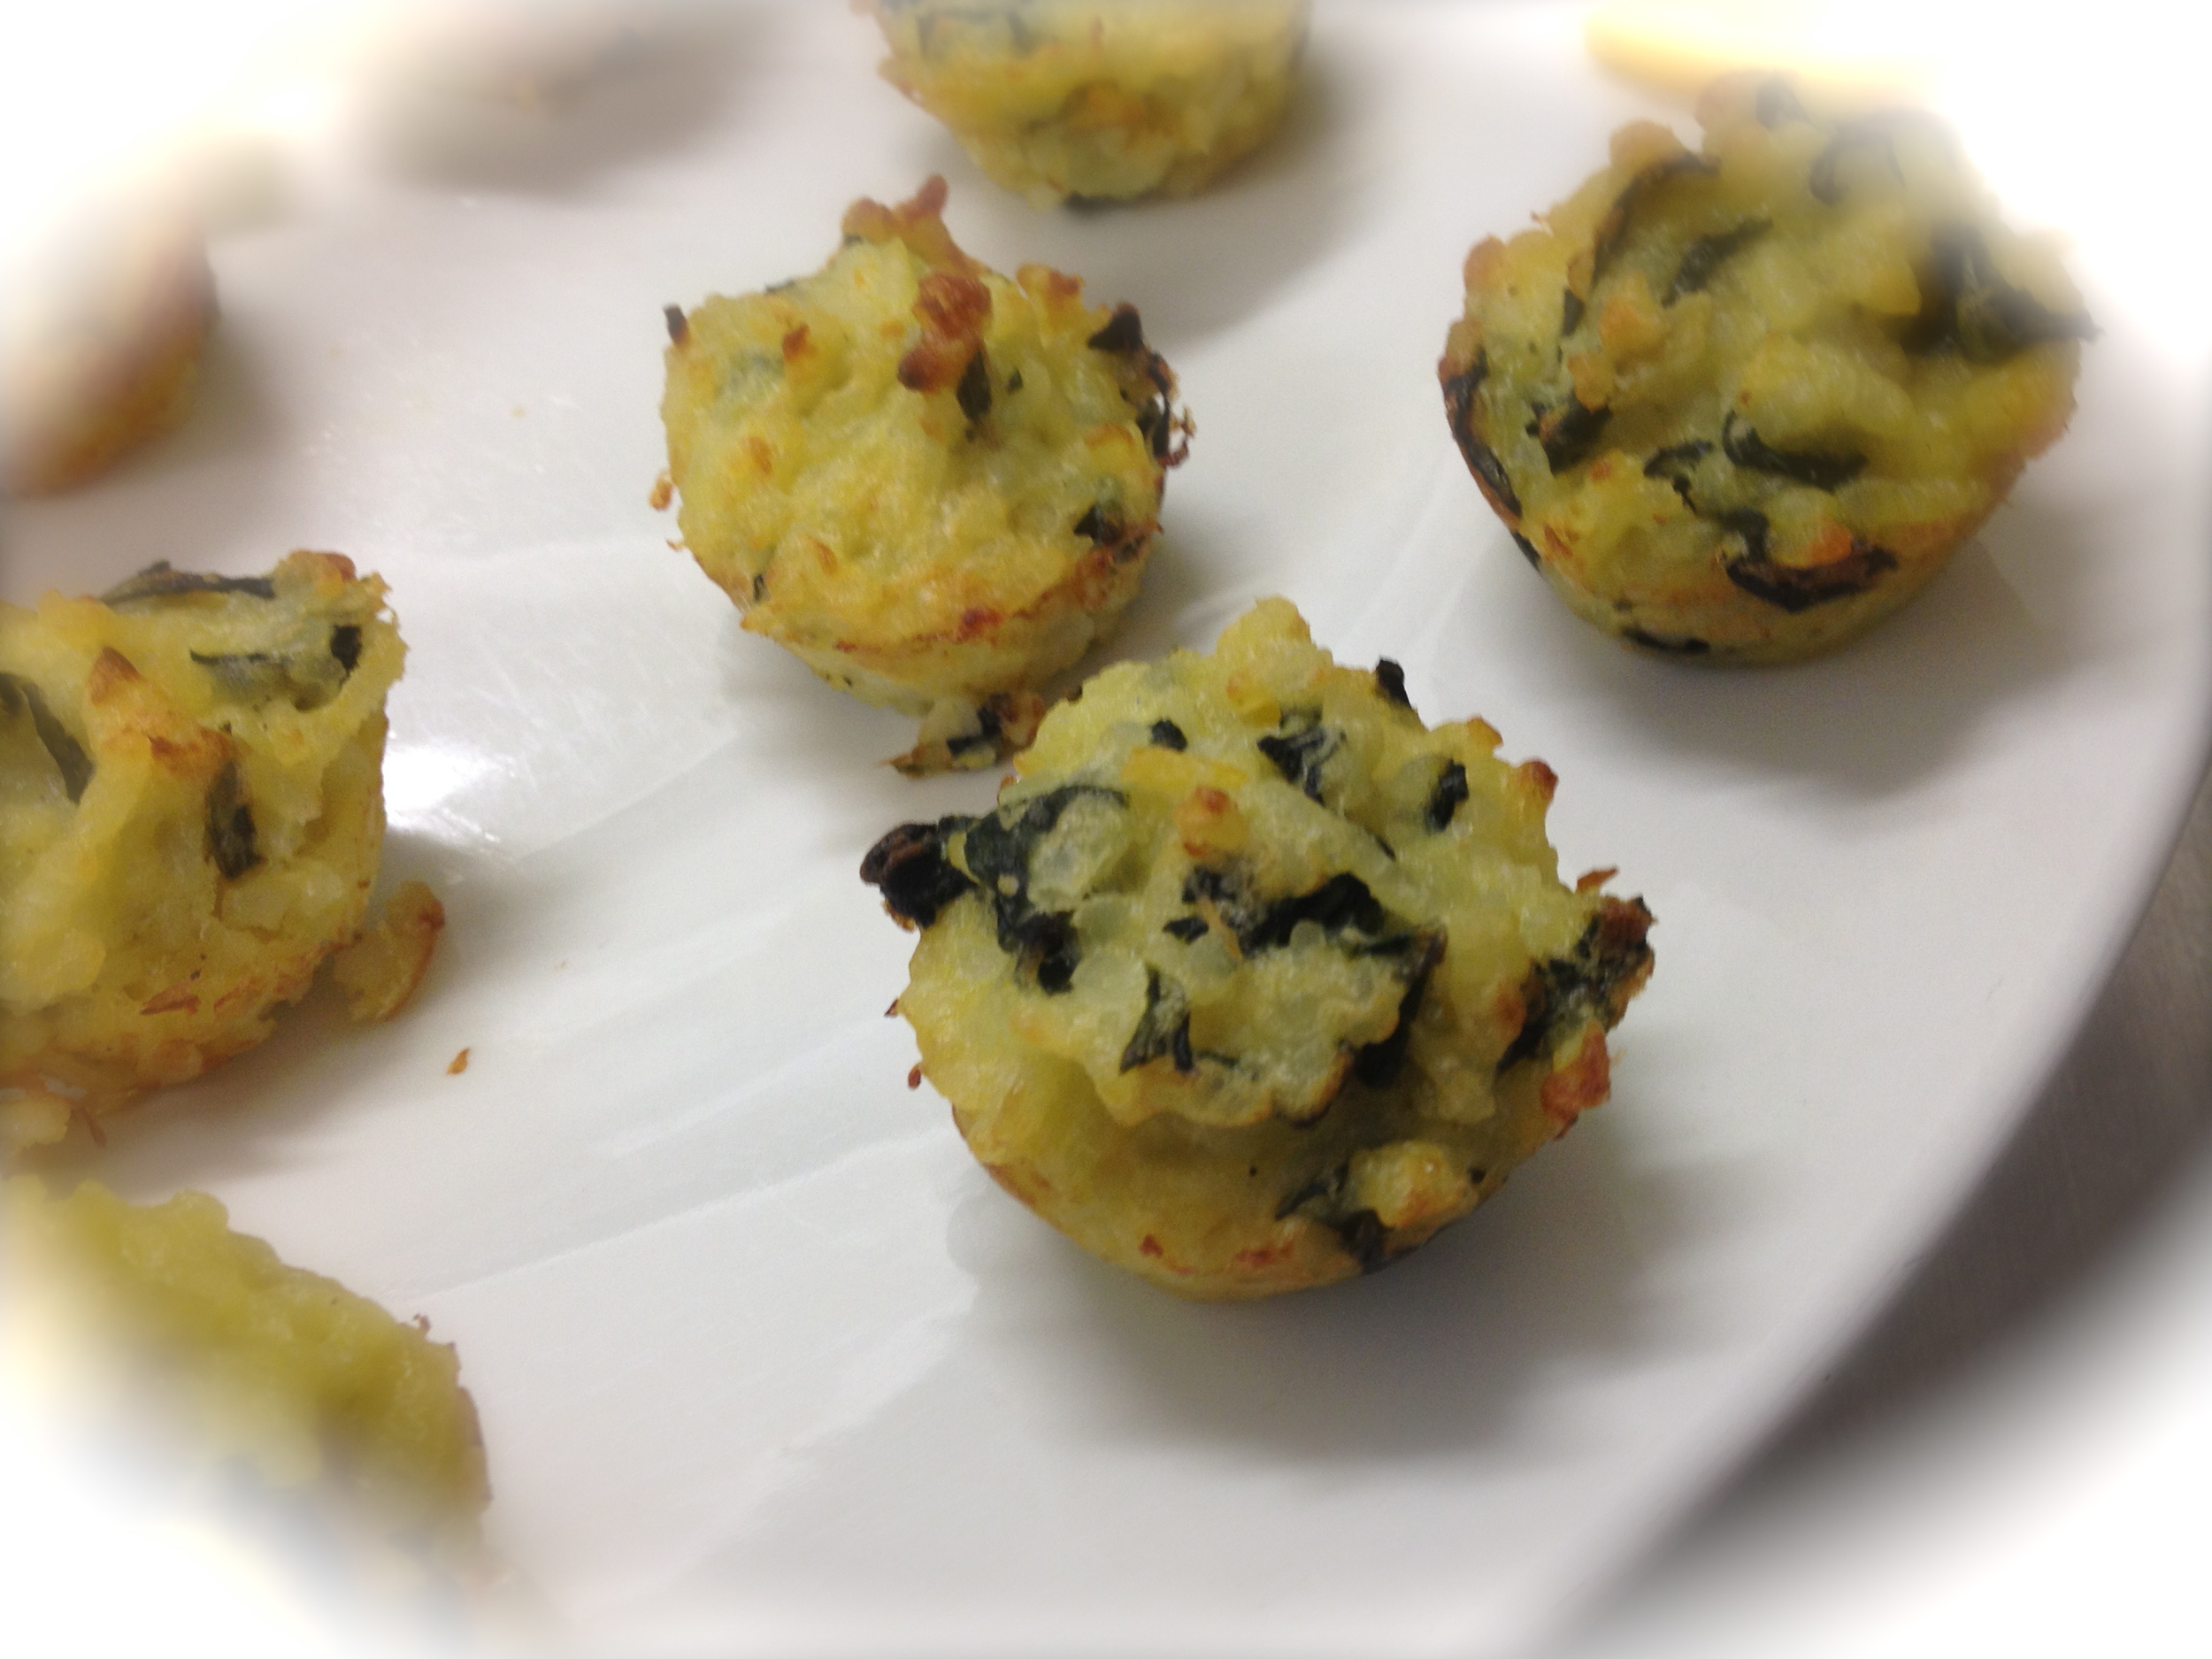   Spinach &amp; lemon risotto
cakes &nbsp;| Catering by Gipps St Deli  &nbsp; 